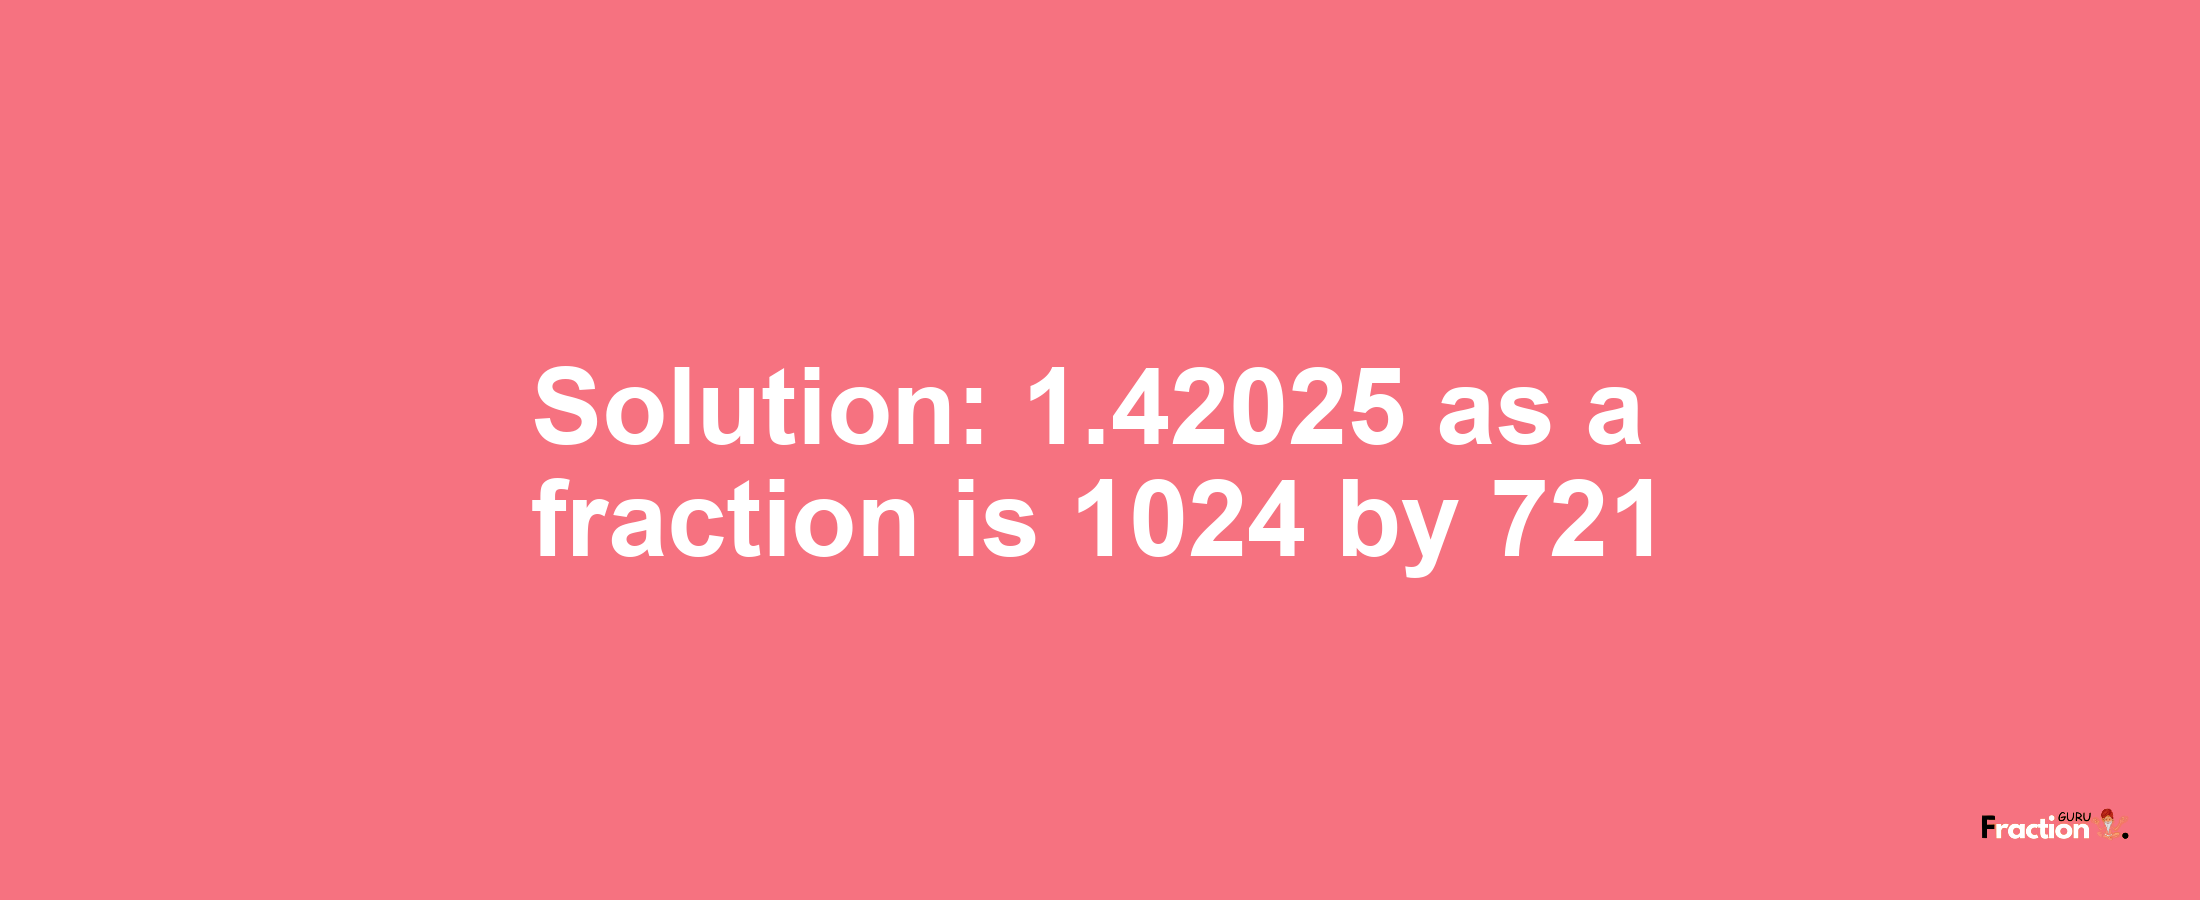 Solution:1.42025 as a fraction is 1024/721